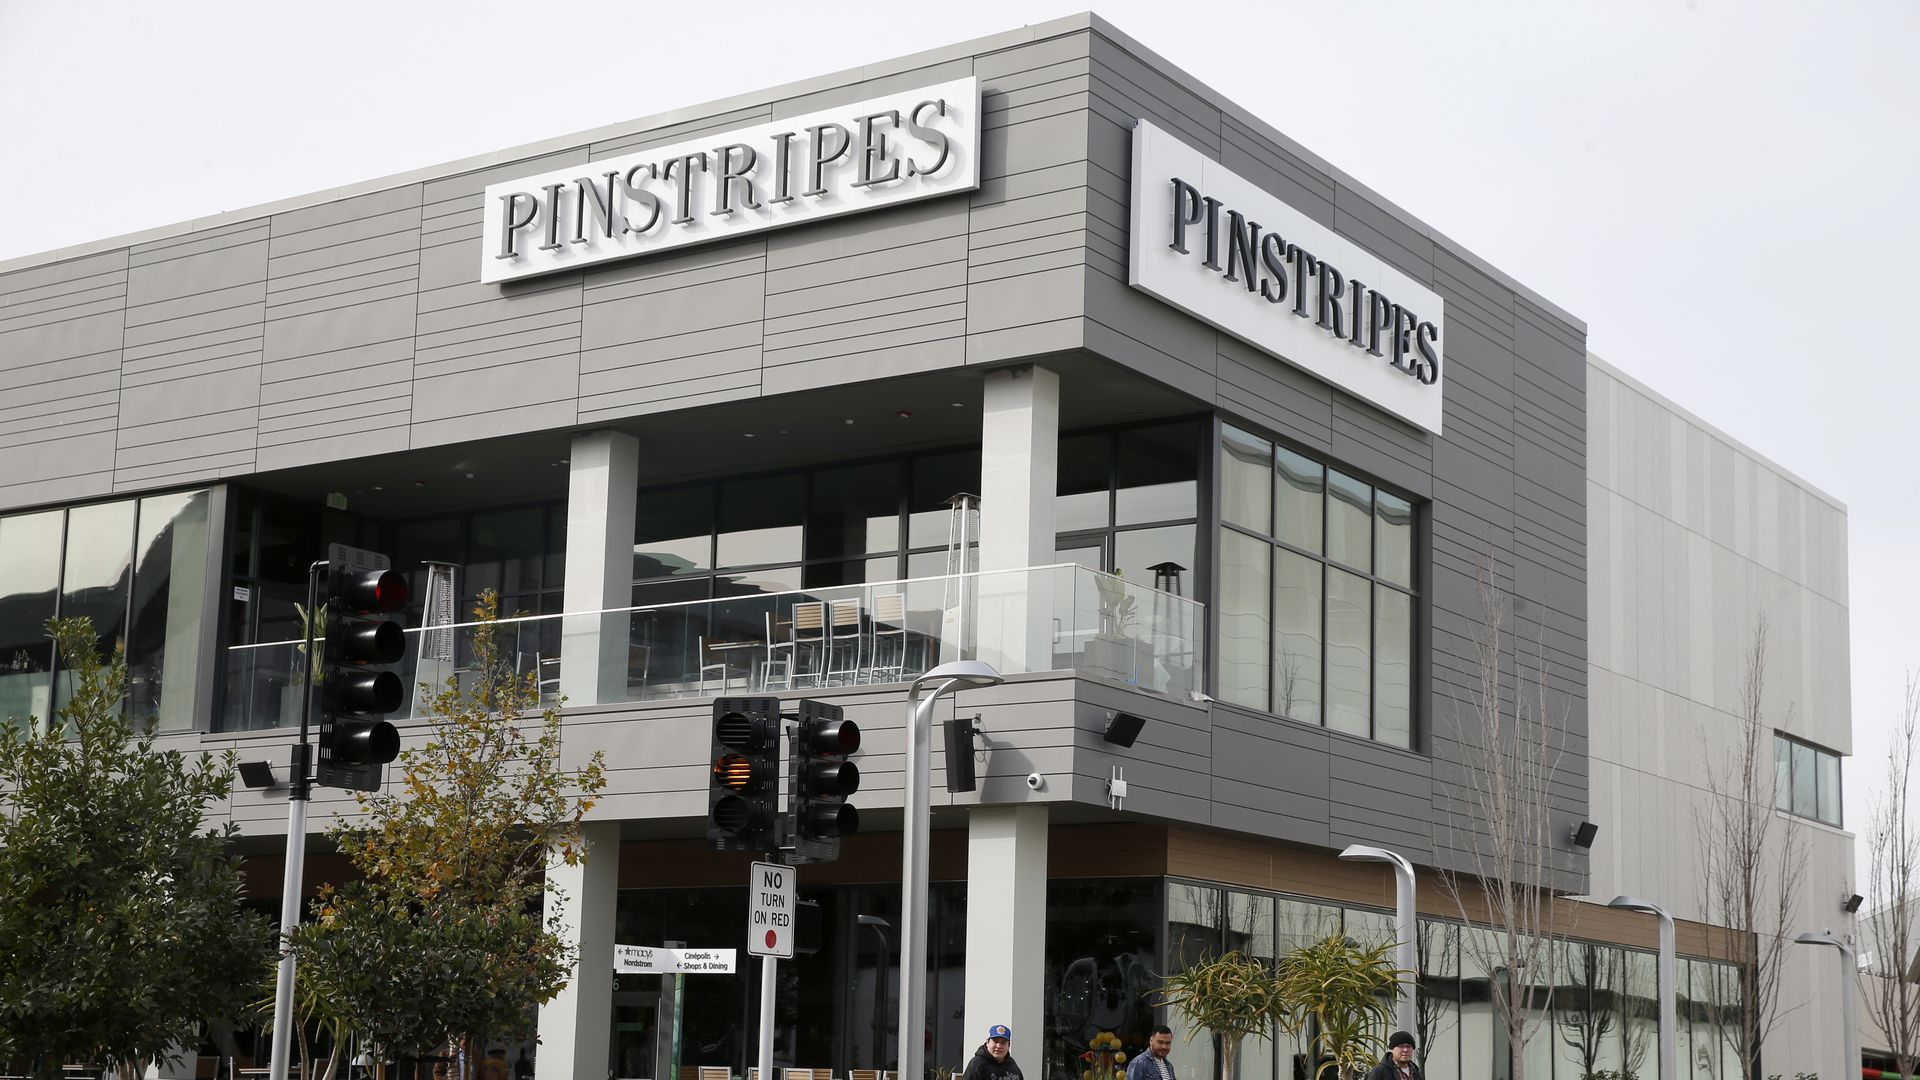 The exterior of Pinstripes, a bowling, bocce and bistro entertainment center.